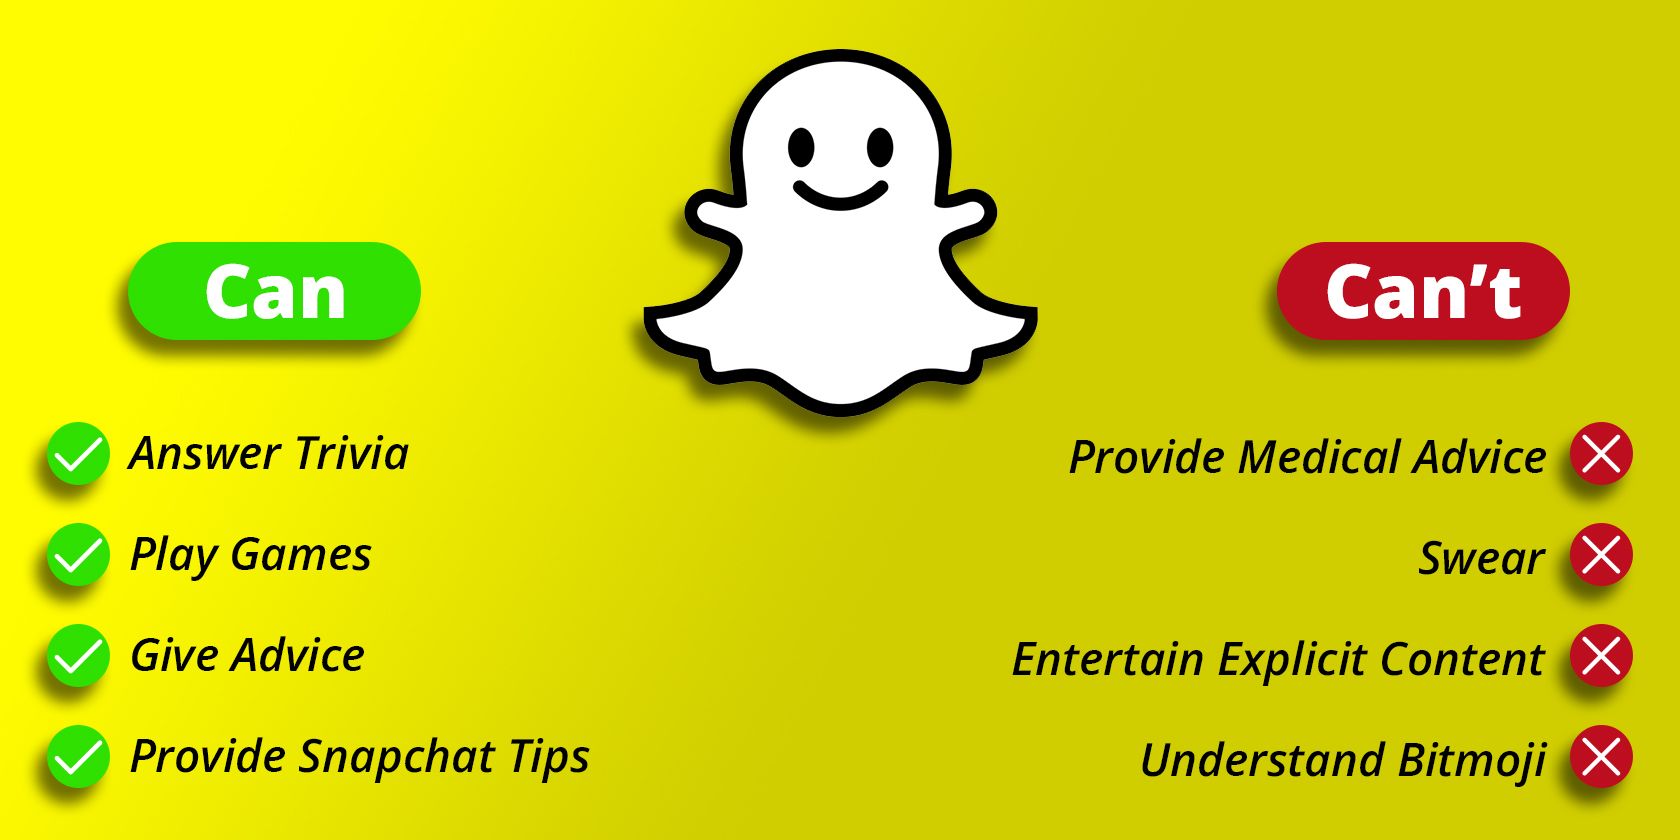 An infograph displaying what Snapchat's AI can and can't do